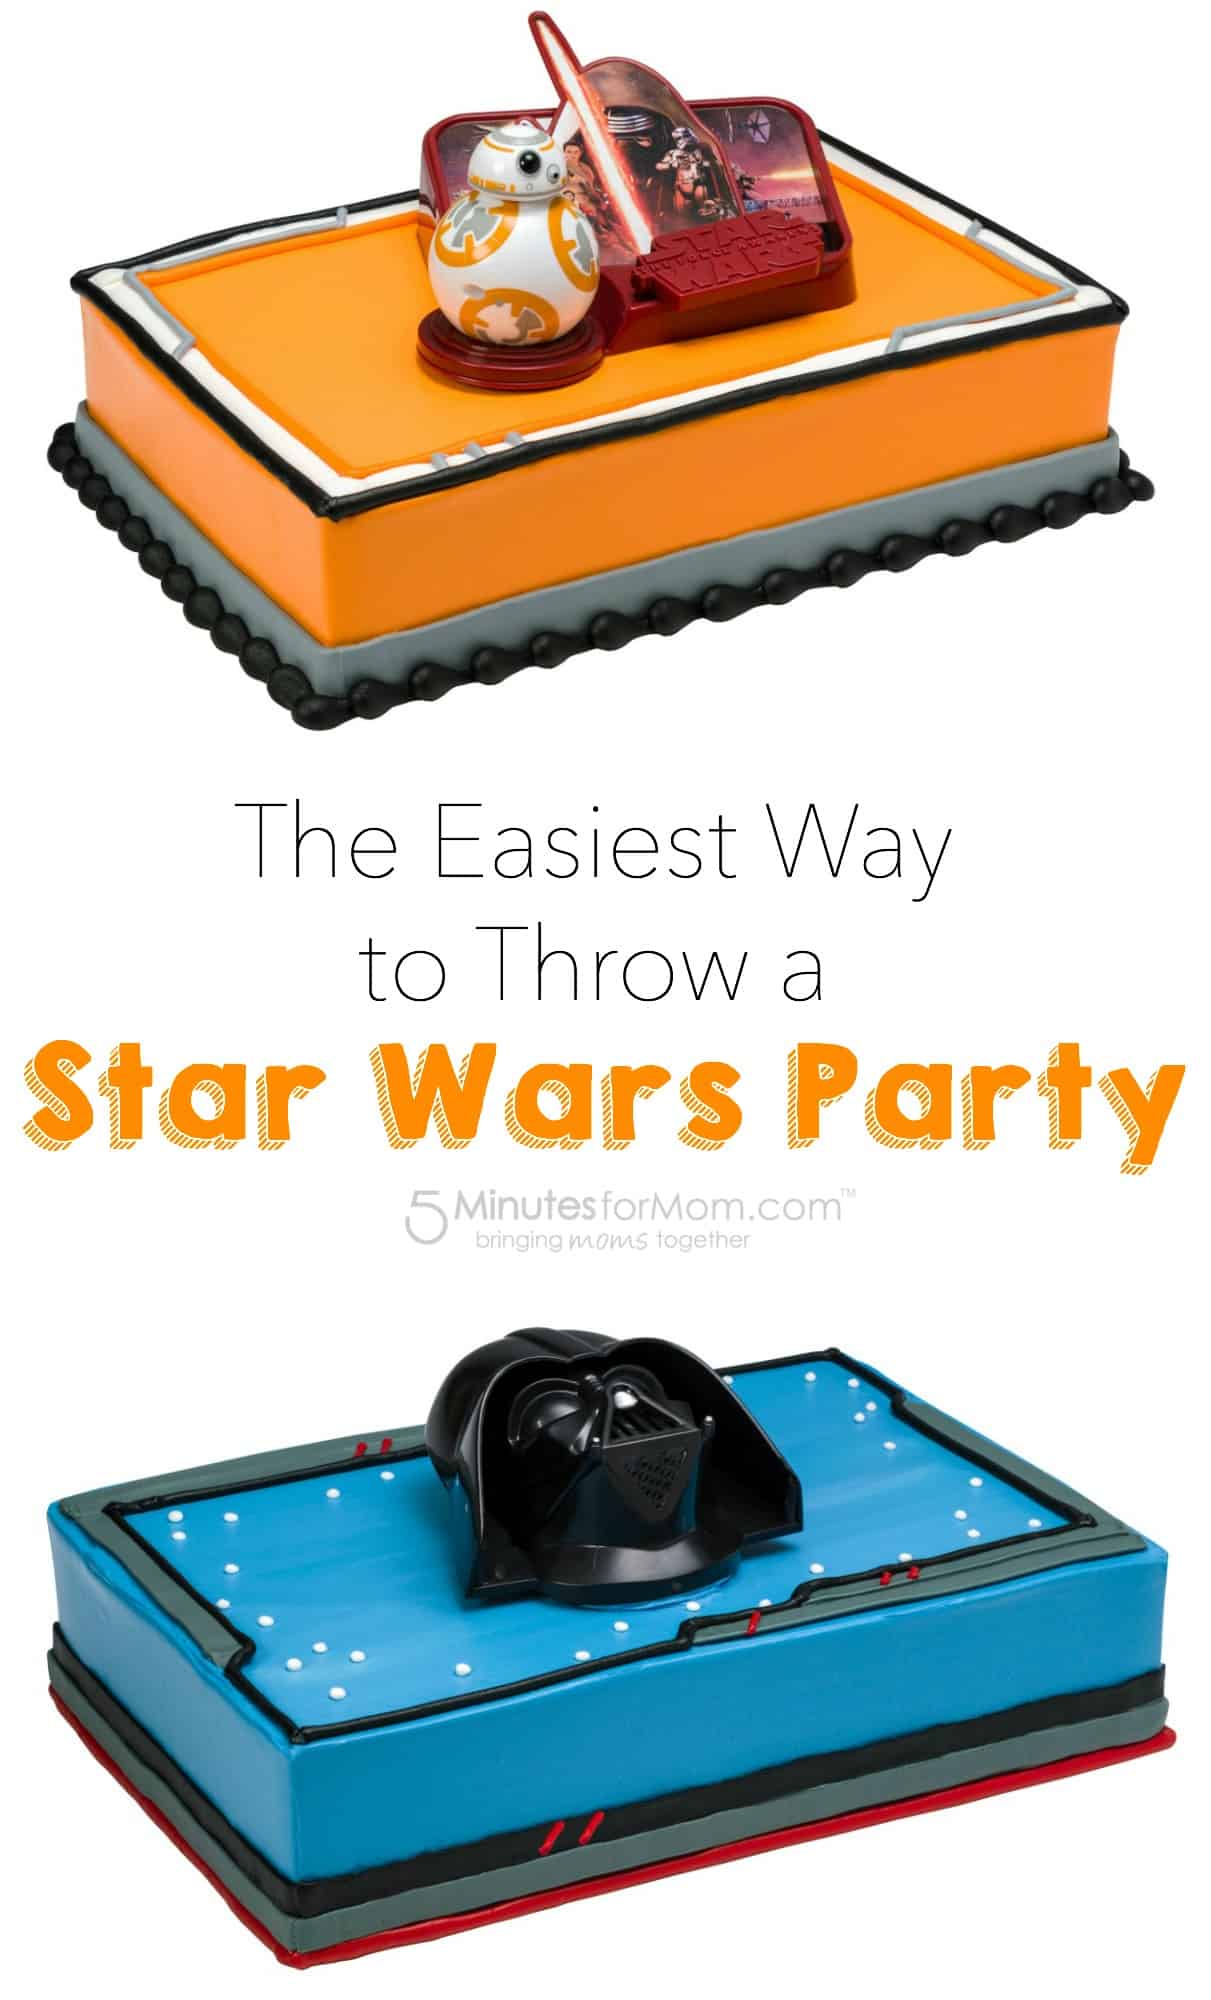 The Easiest Way to Throw a Star Wars Party